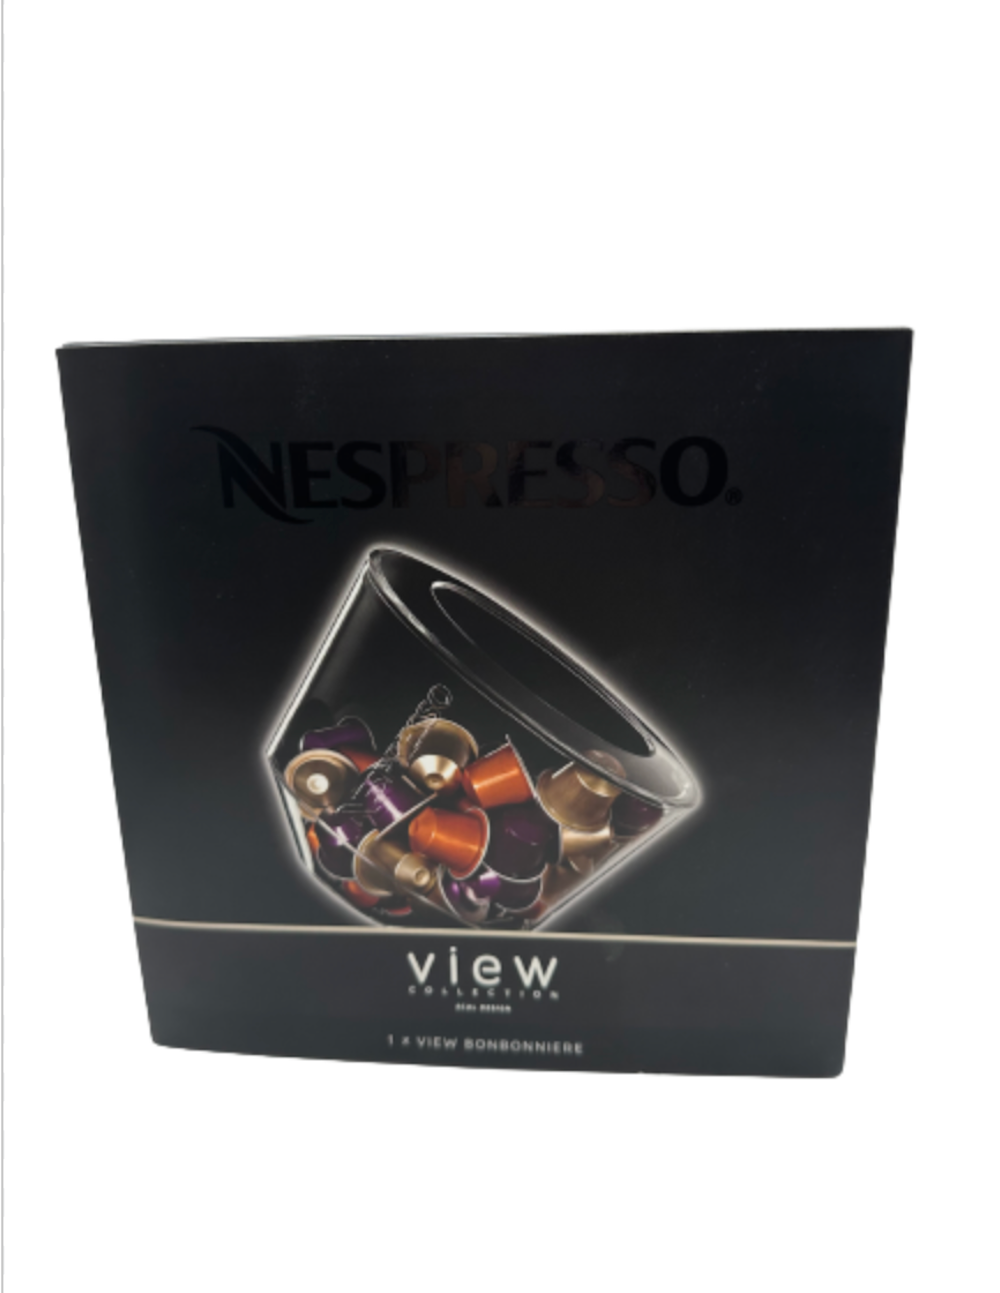 Nespresso View Collection Clear Capsule Coffee Pod Dispenser New with Box